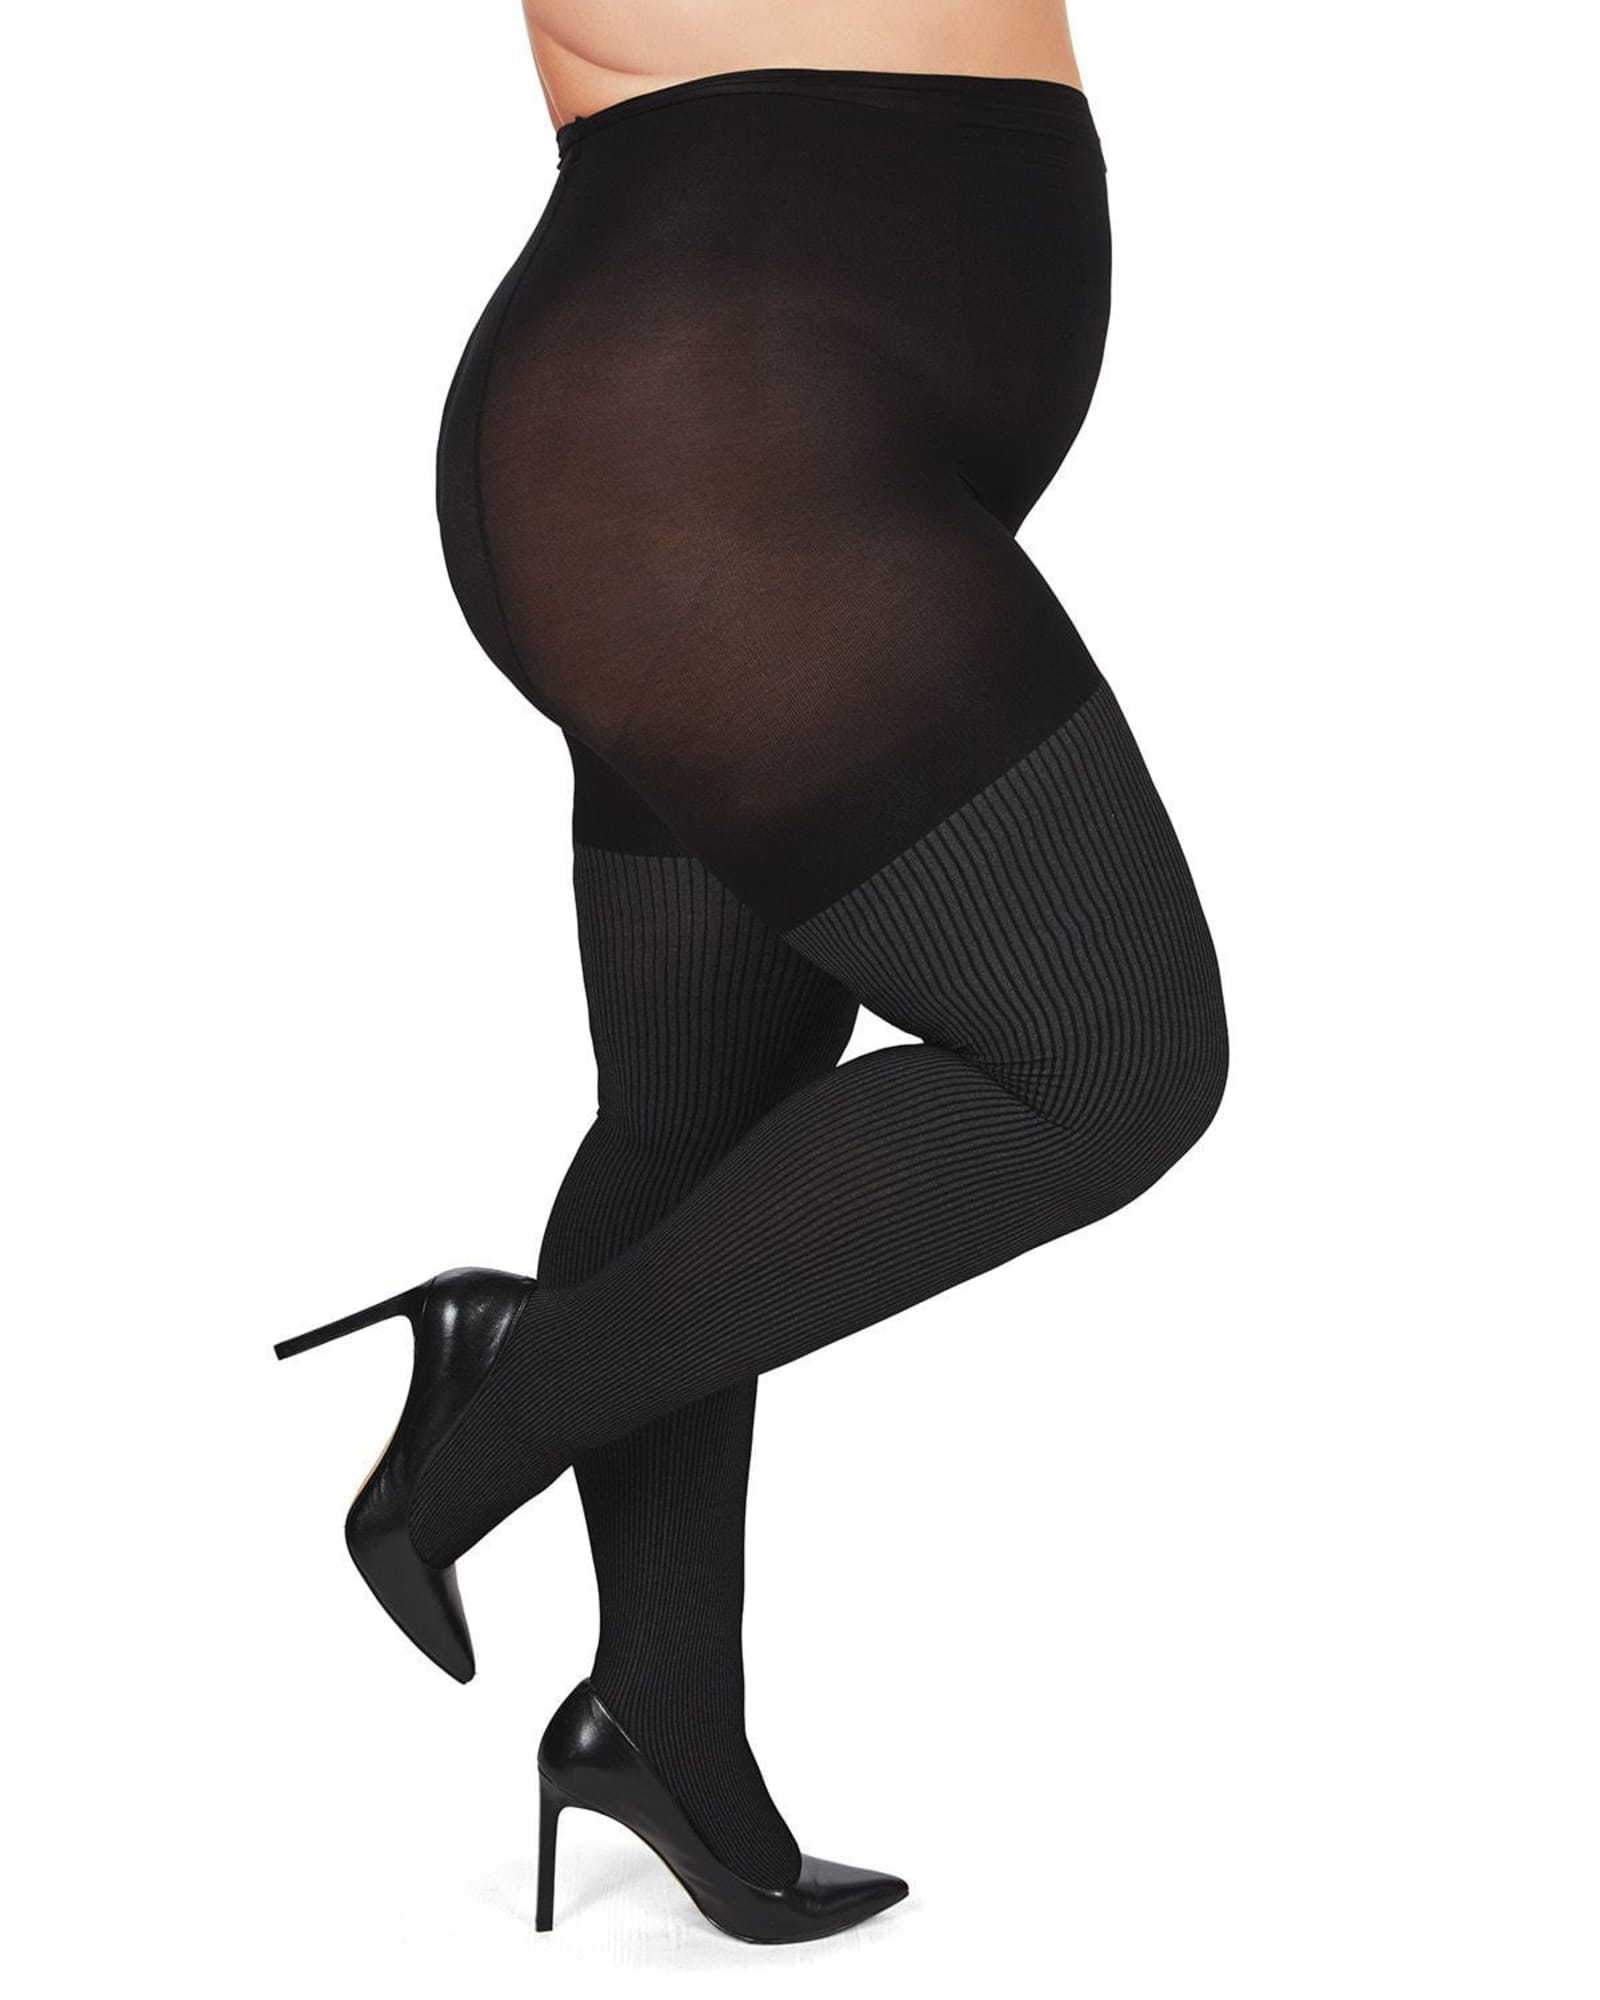 Plus Size Opaque Tights